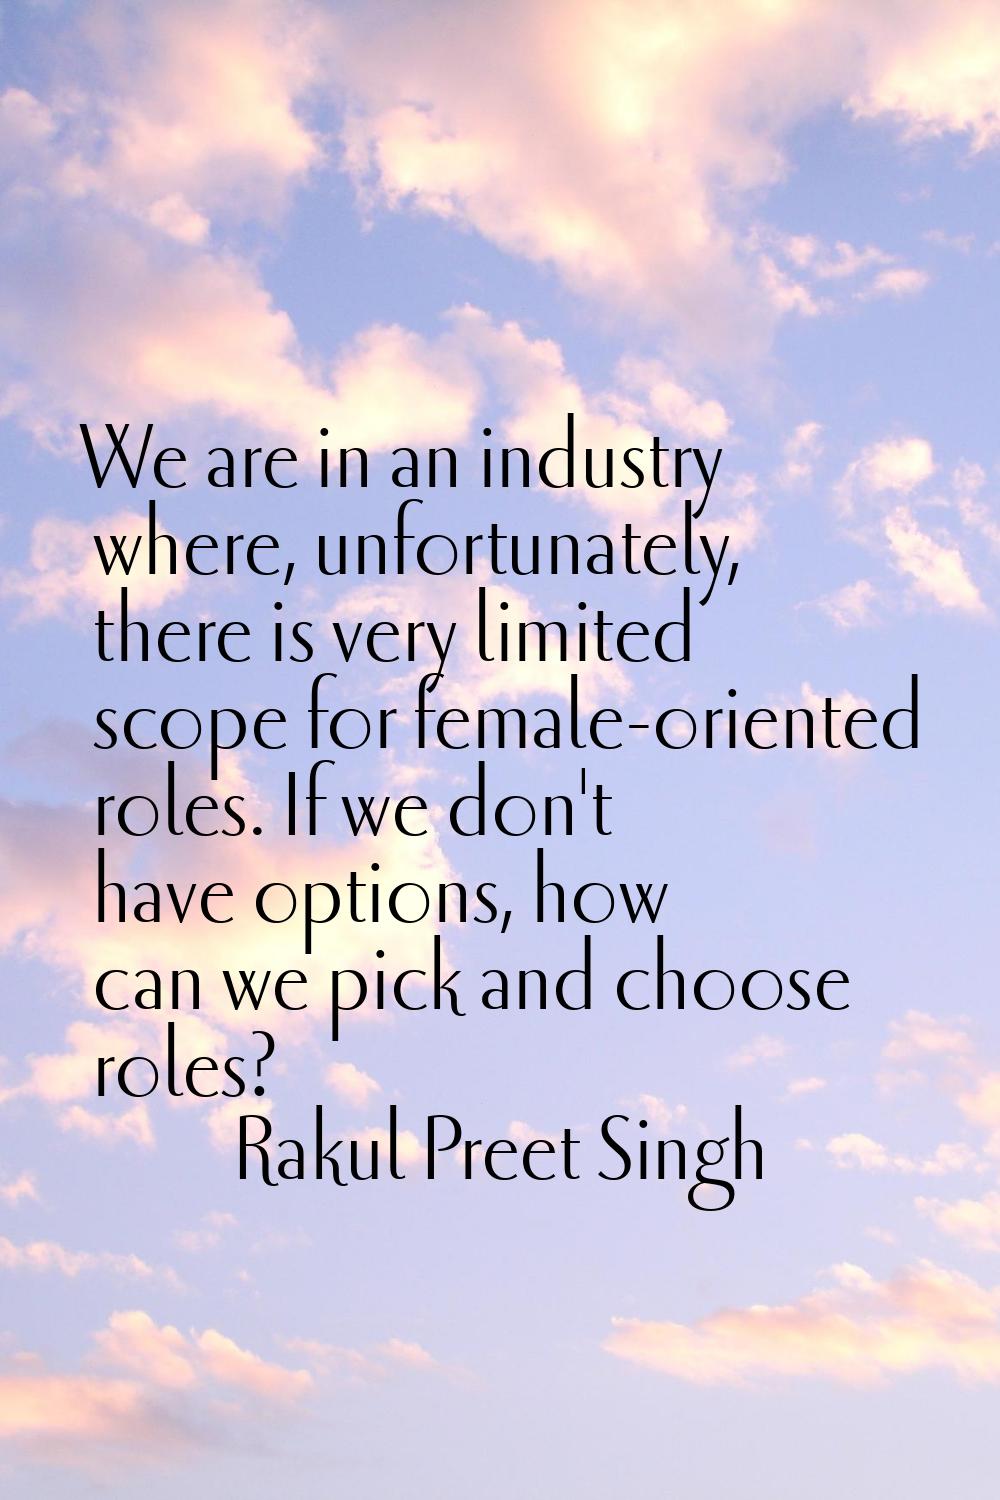 We are in an industry where, unfortunately, there is very limited scope for female-oriented roles. 